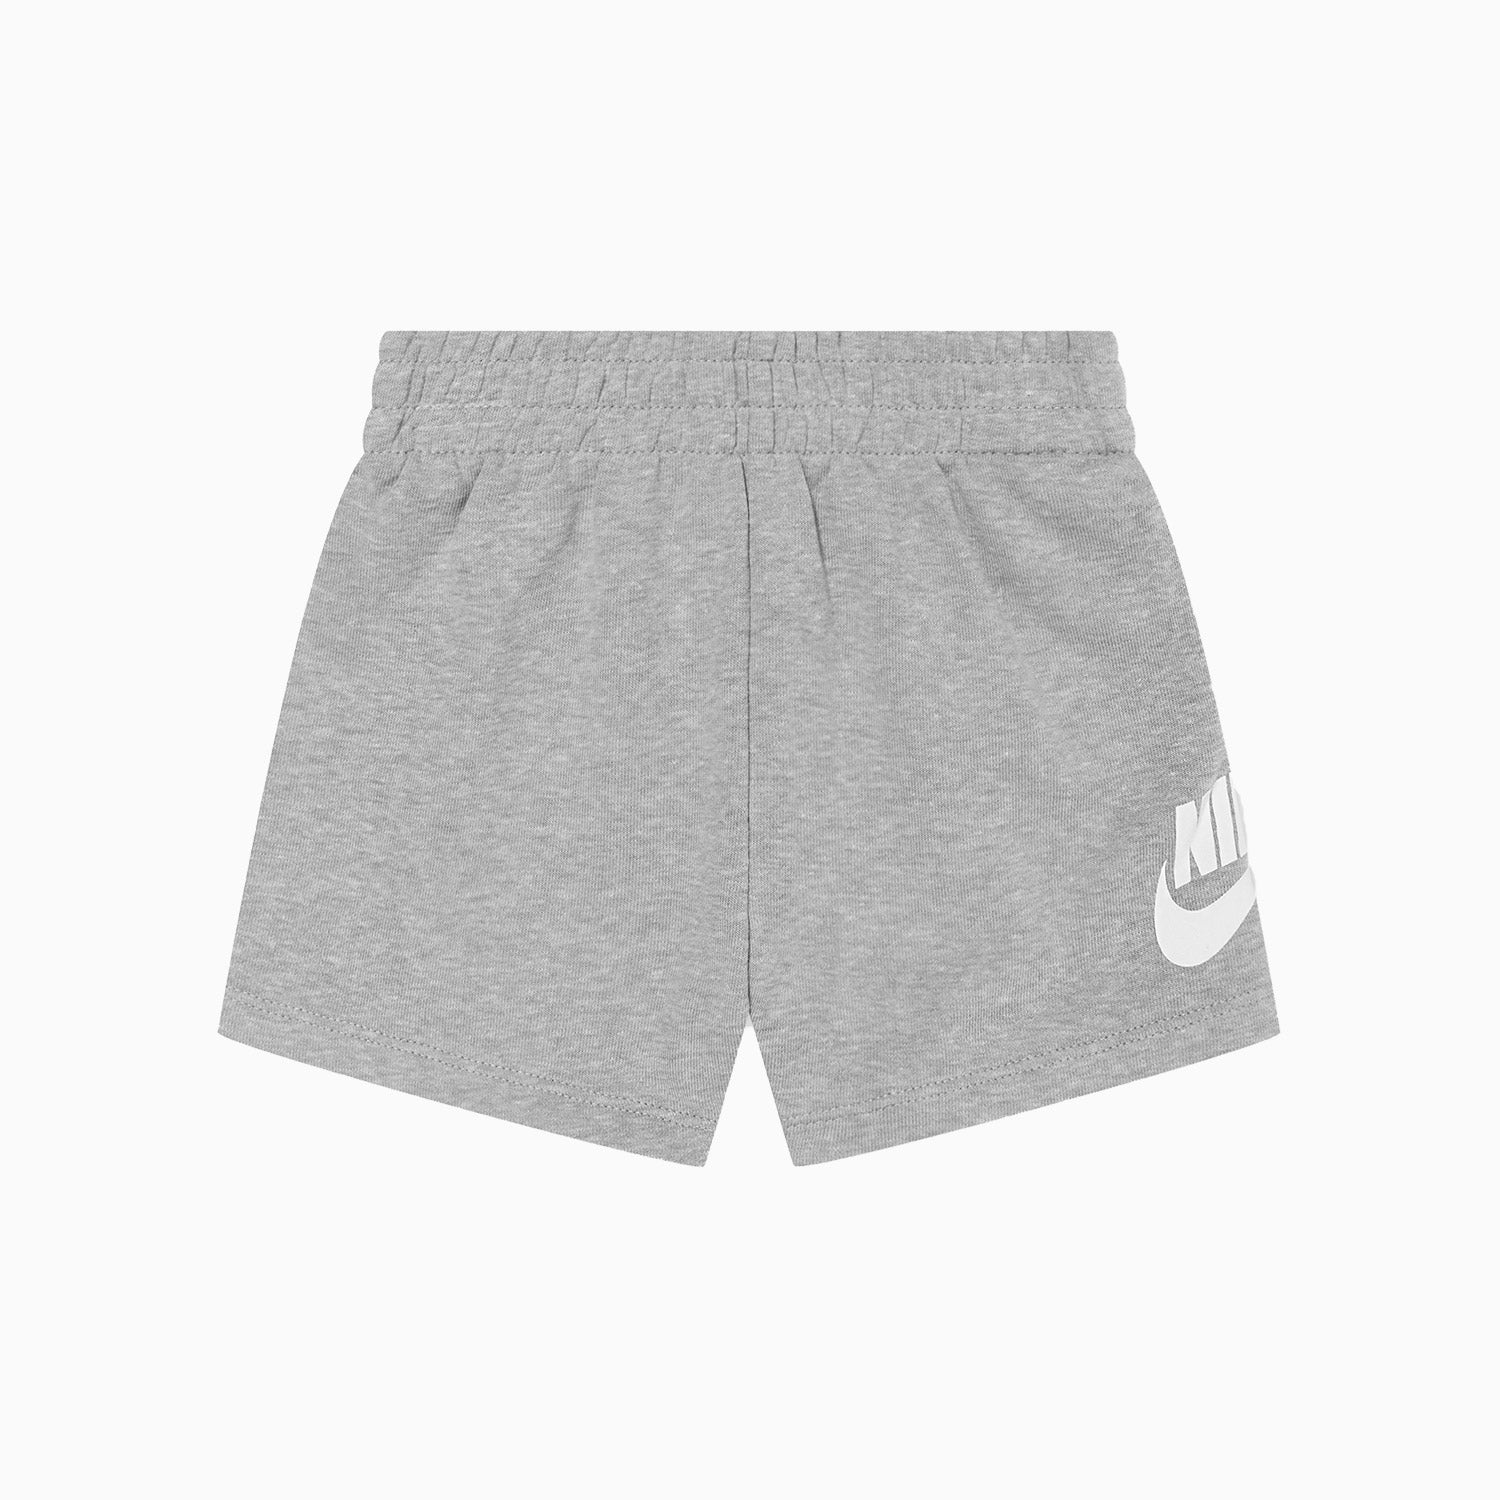 nike-kids-sportswear-club-t-shirt-and-shorts-2-piece-set-outfit-